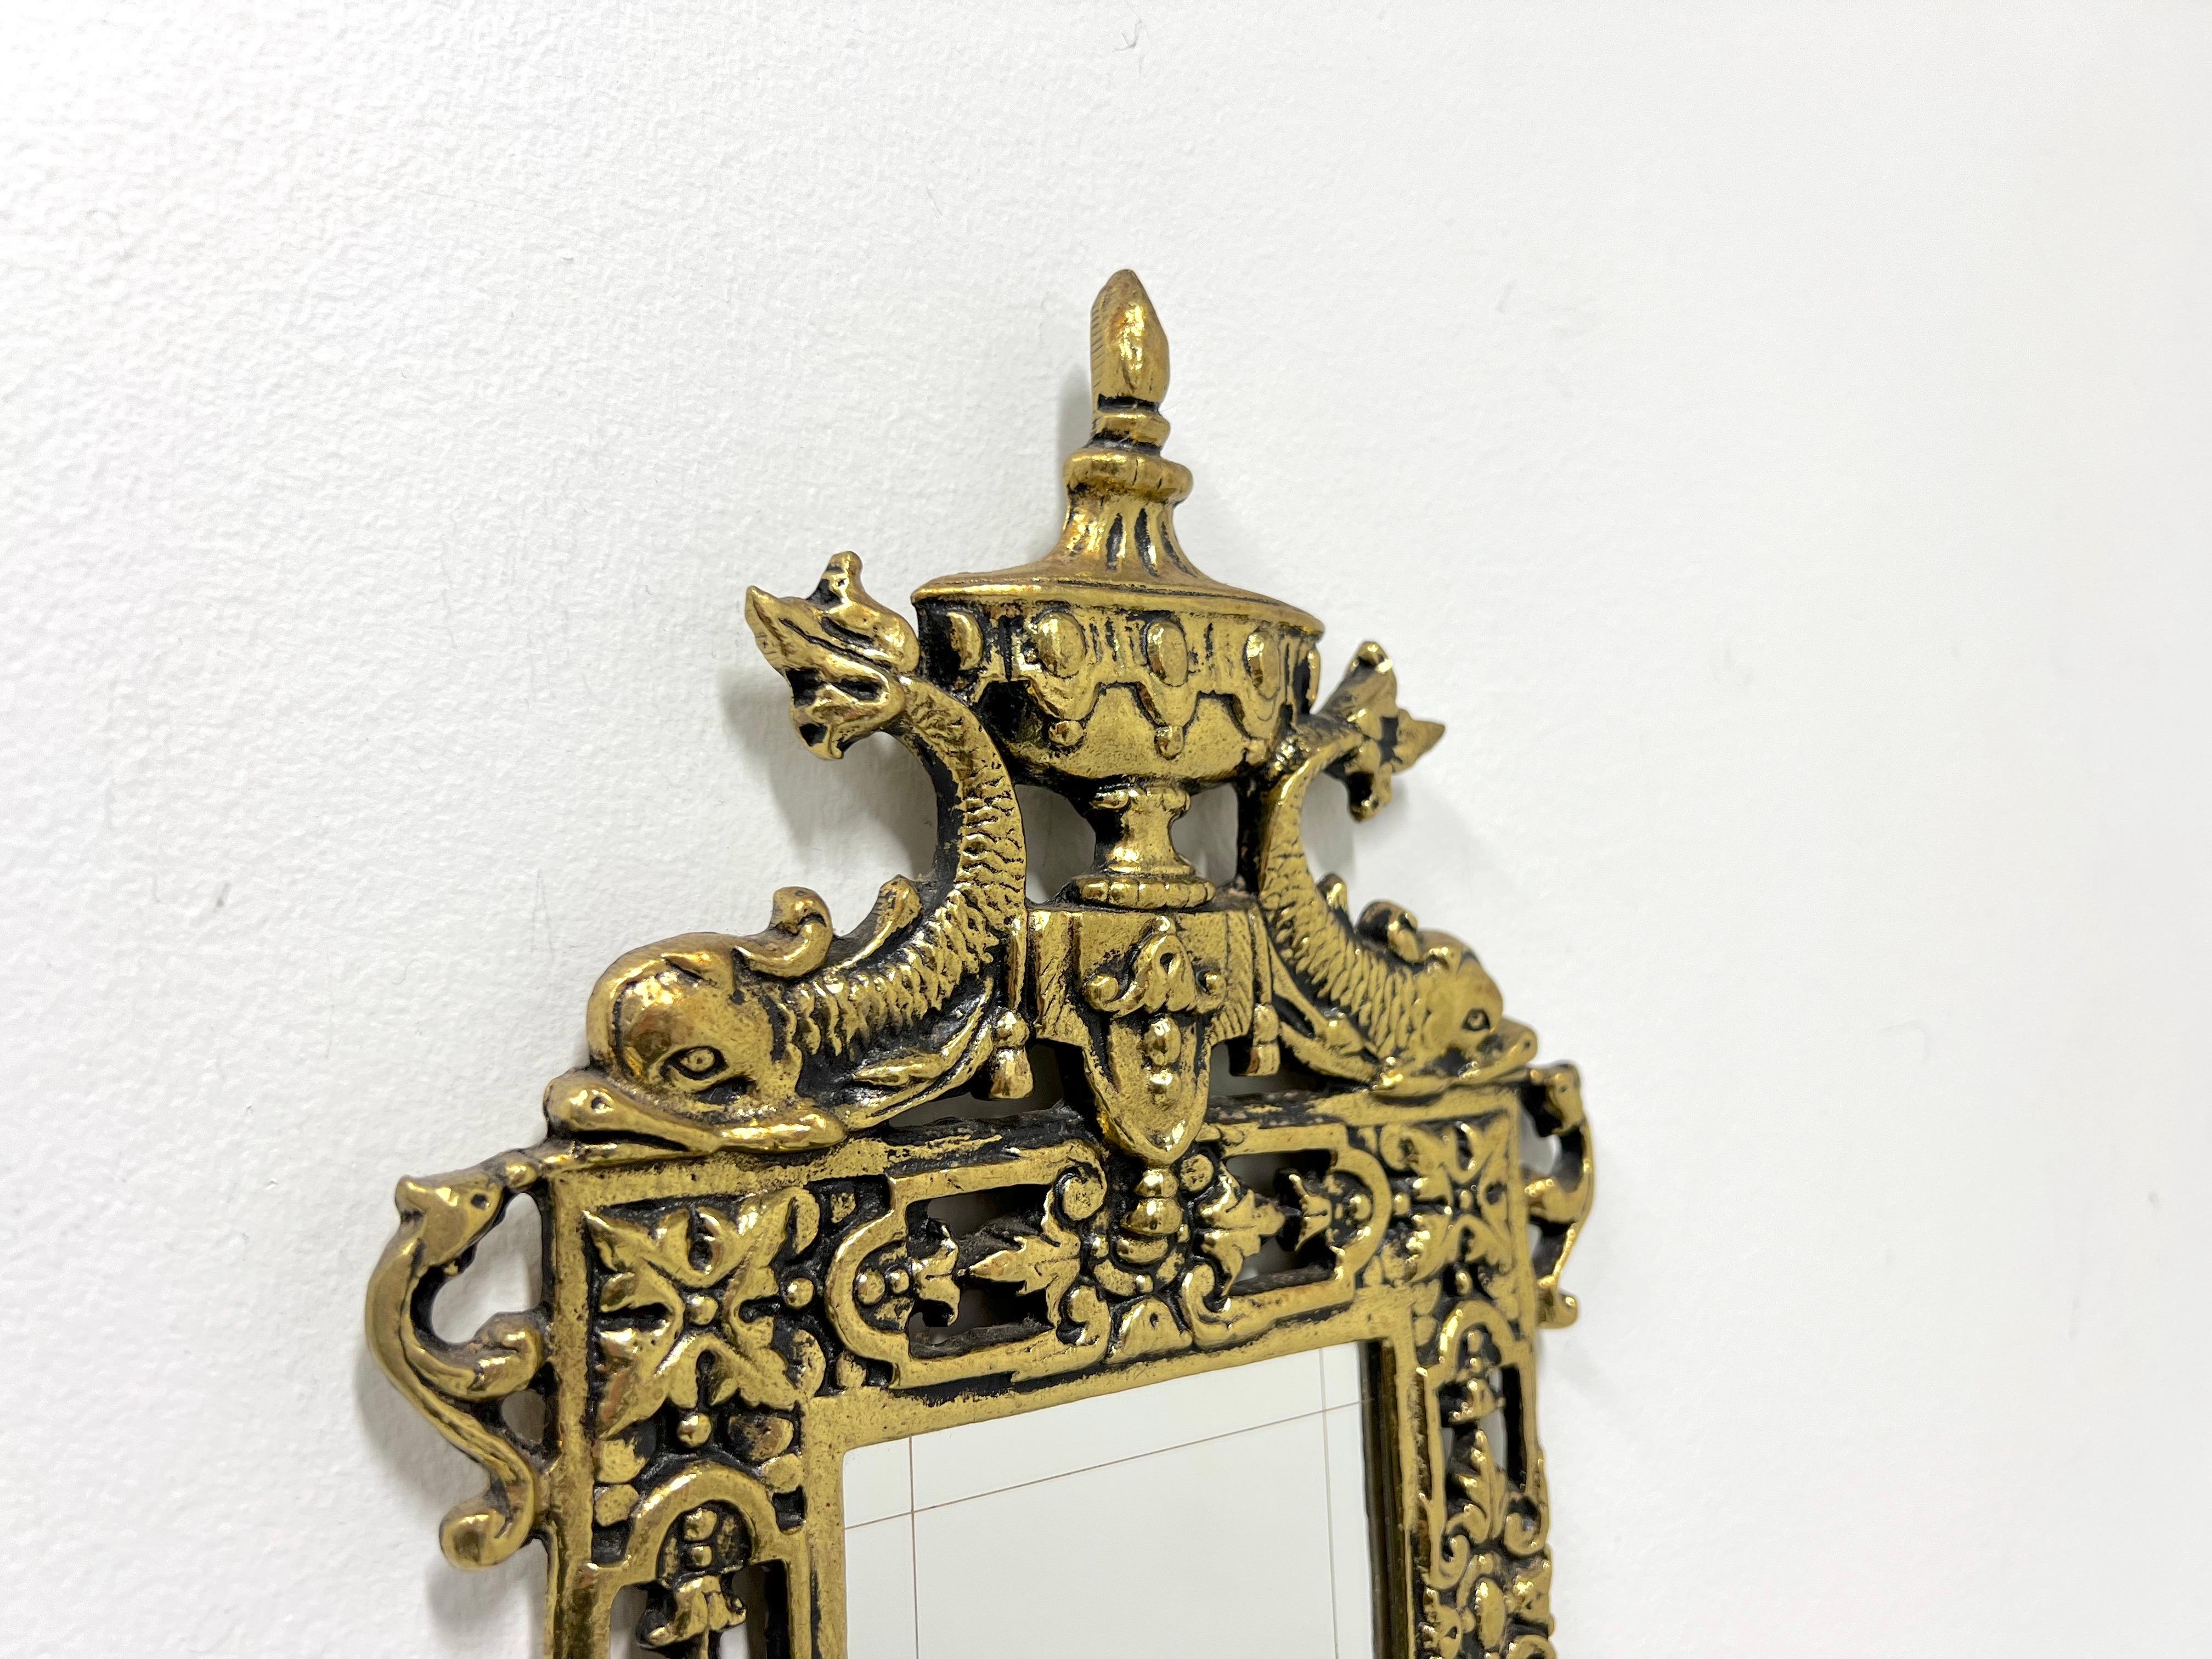 A French Provincial style mirrored candle wall sconce, unbranded. Solid brass decoratively sculpted with a center rectangular shaped mirror, urn shape with two mythical dolphins to the very top, decorative base, and two curved arms to support